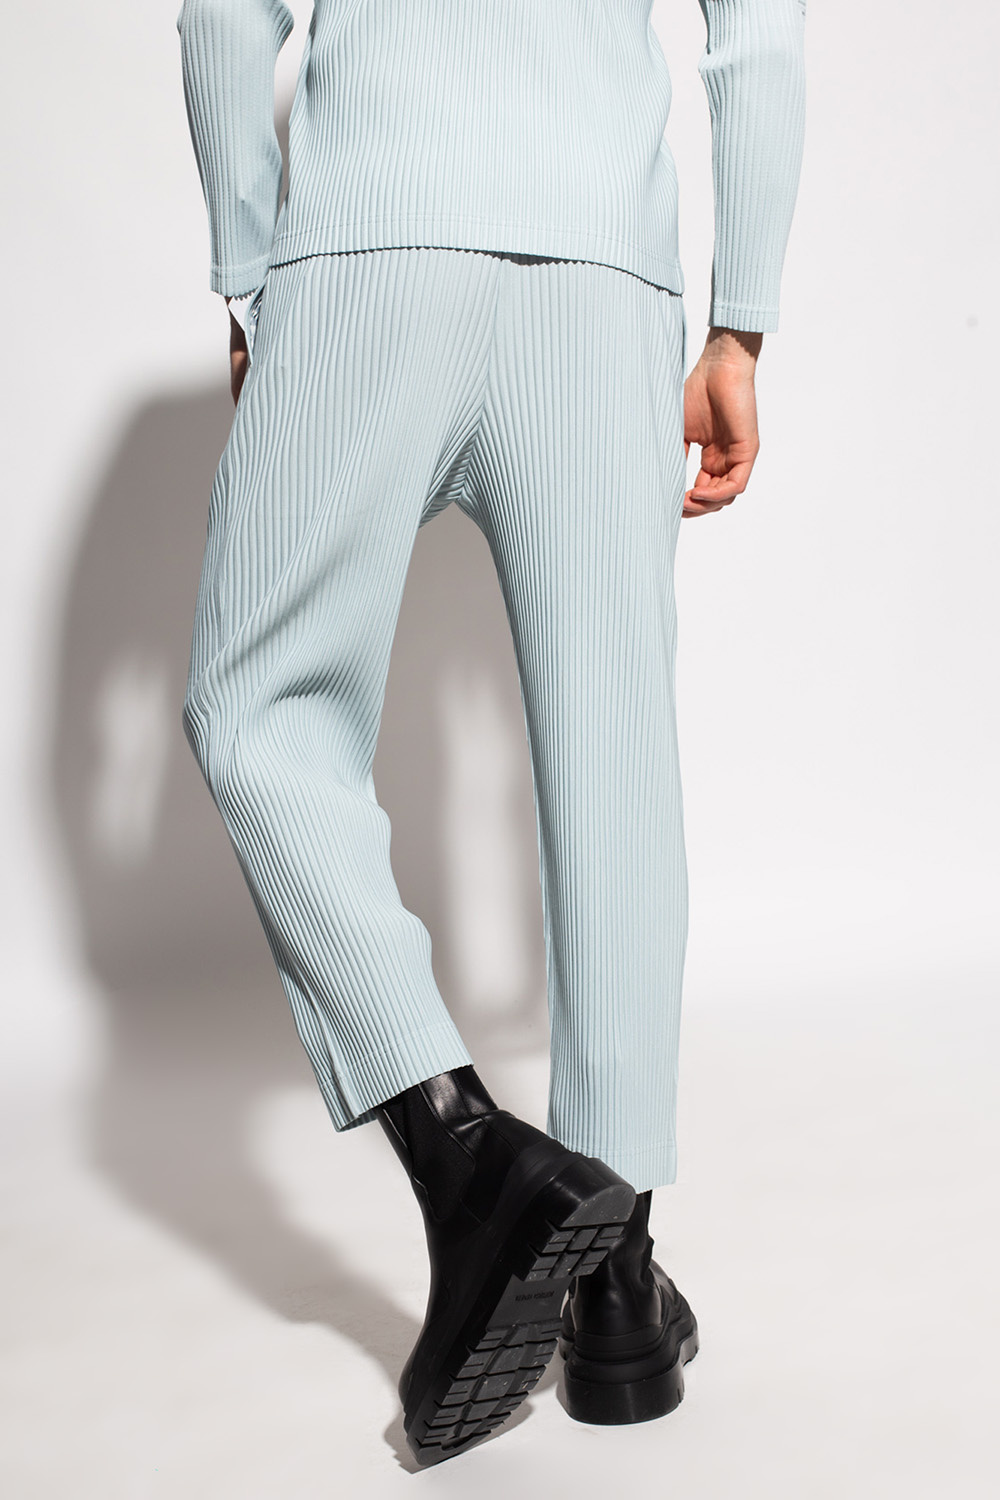 Issey Miyake Homme Plisse Pleated trousers | Men's Clothing 